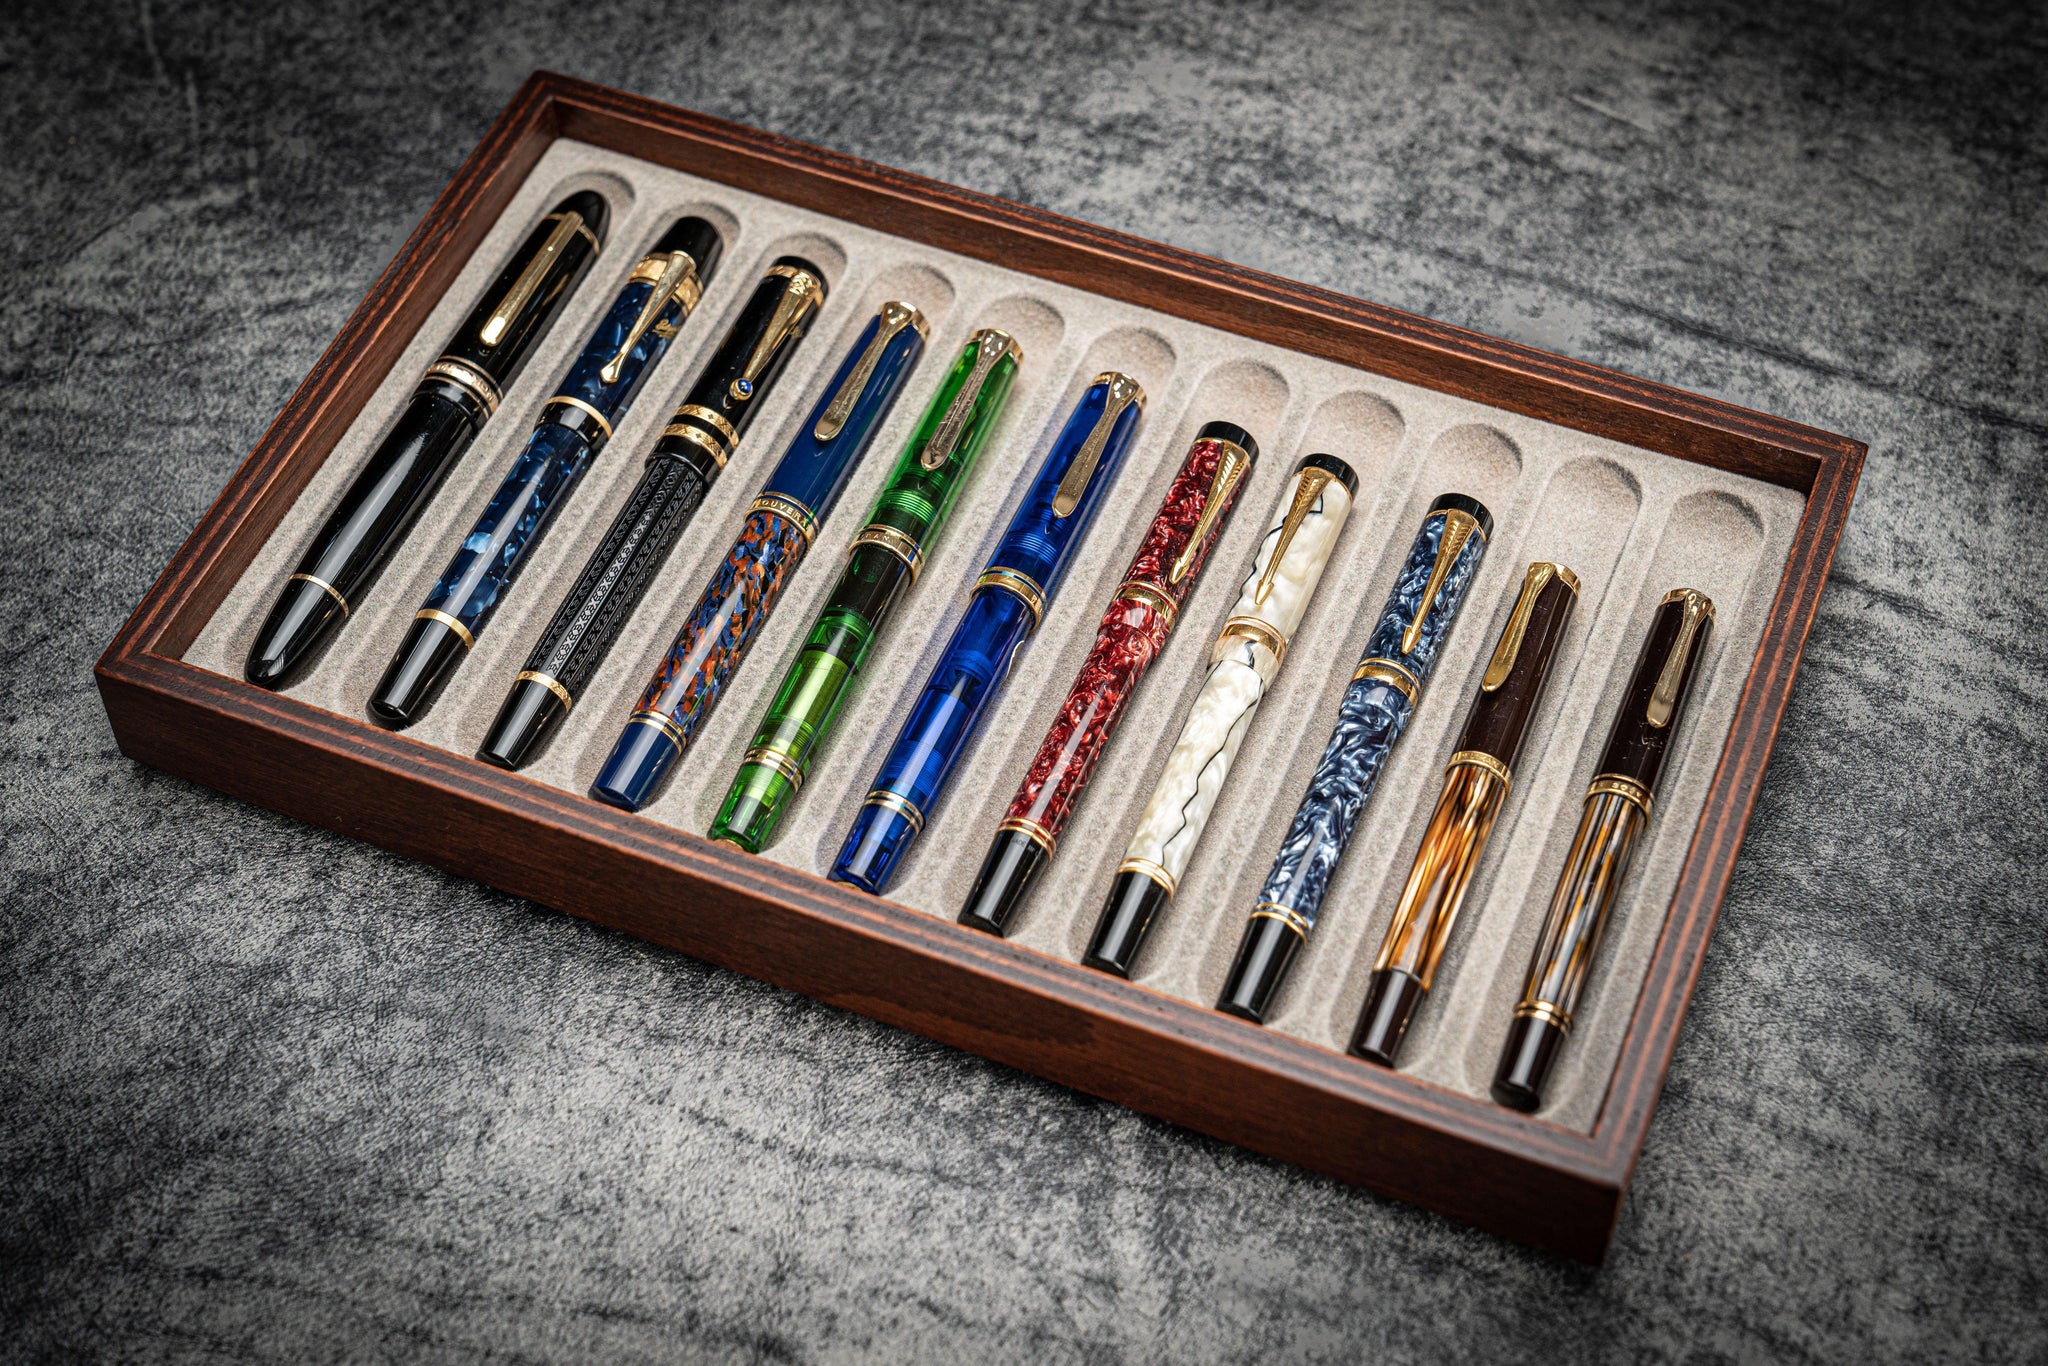 Stack & Store Wood Pen Display Box - Holds 11 Pens